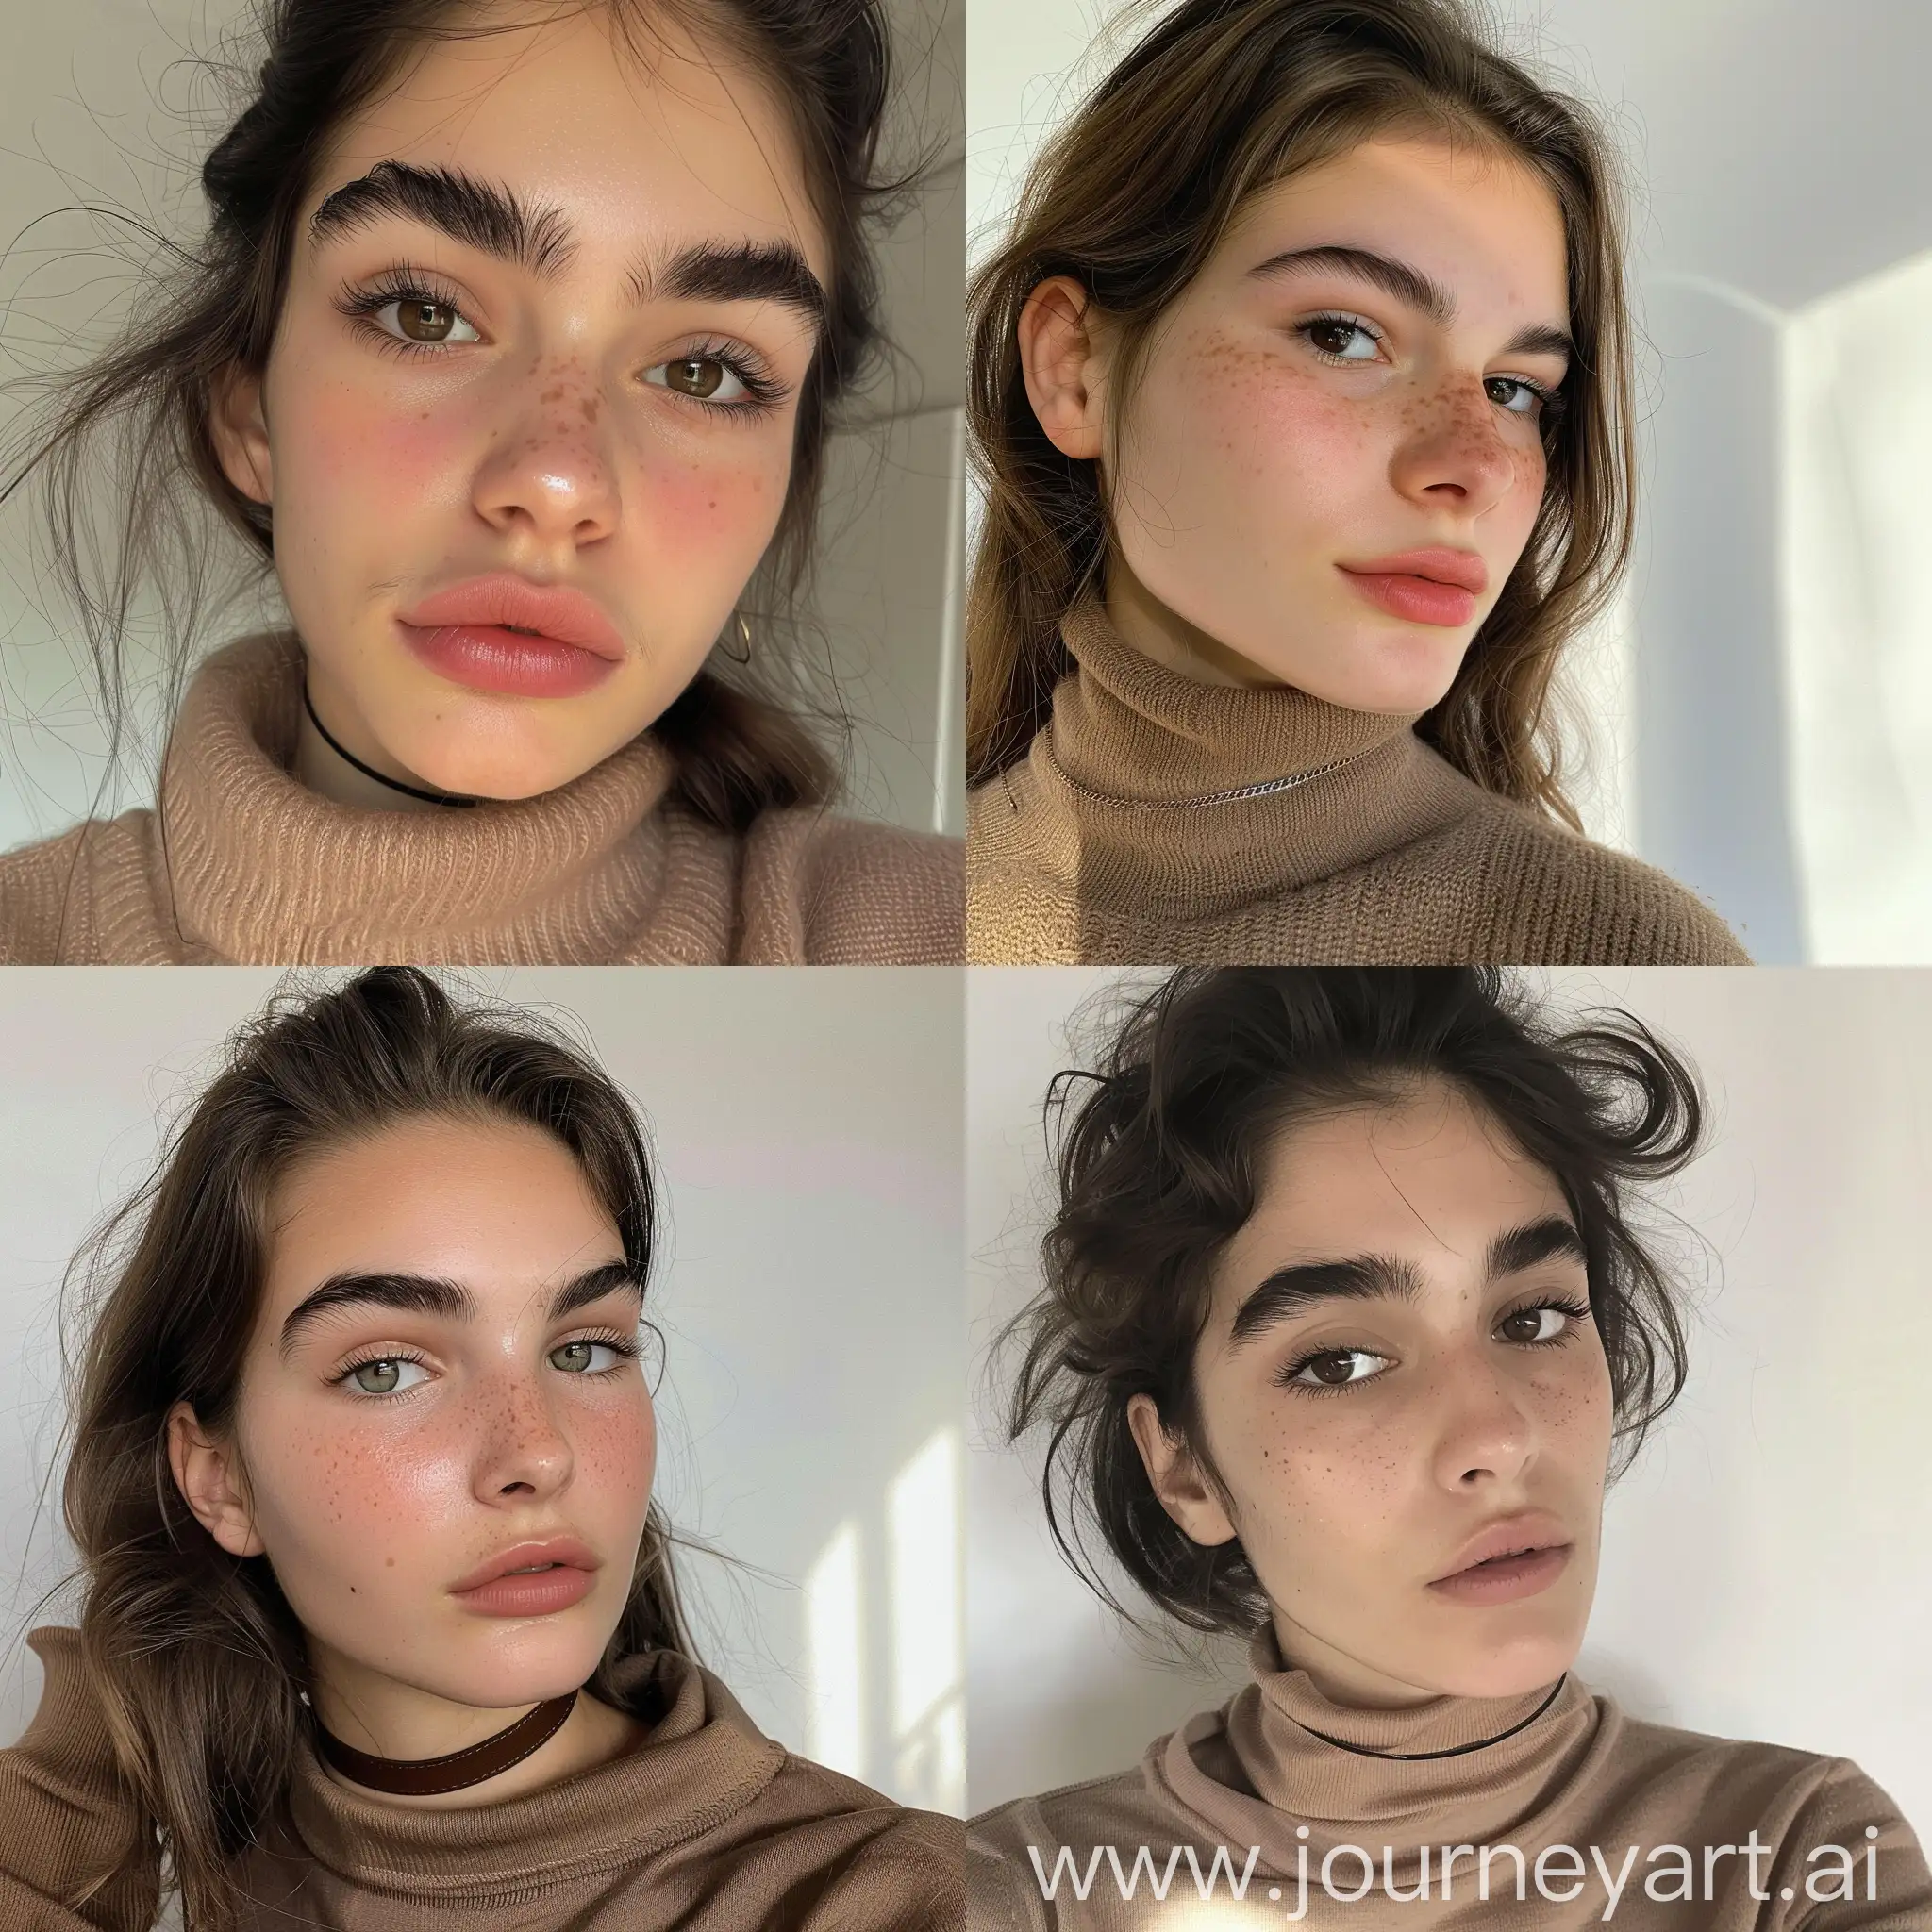 Aesthetic Instagram selfie of a teenage girl, big nose, Jewish, broad nose, looking to the side slightly, super model, bushy eyebrows, choker, soft brown tones, turtle neck